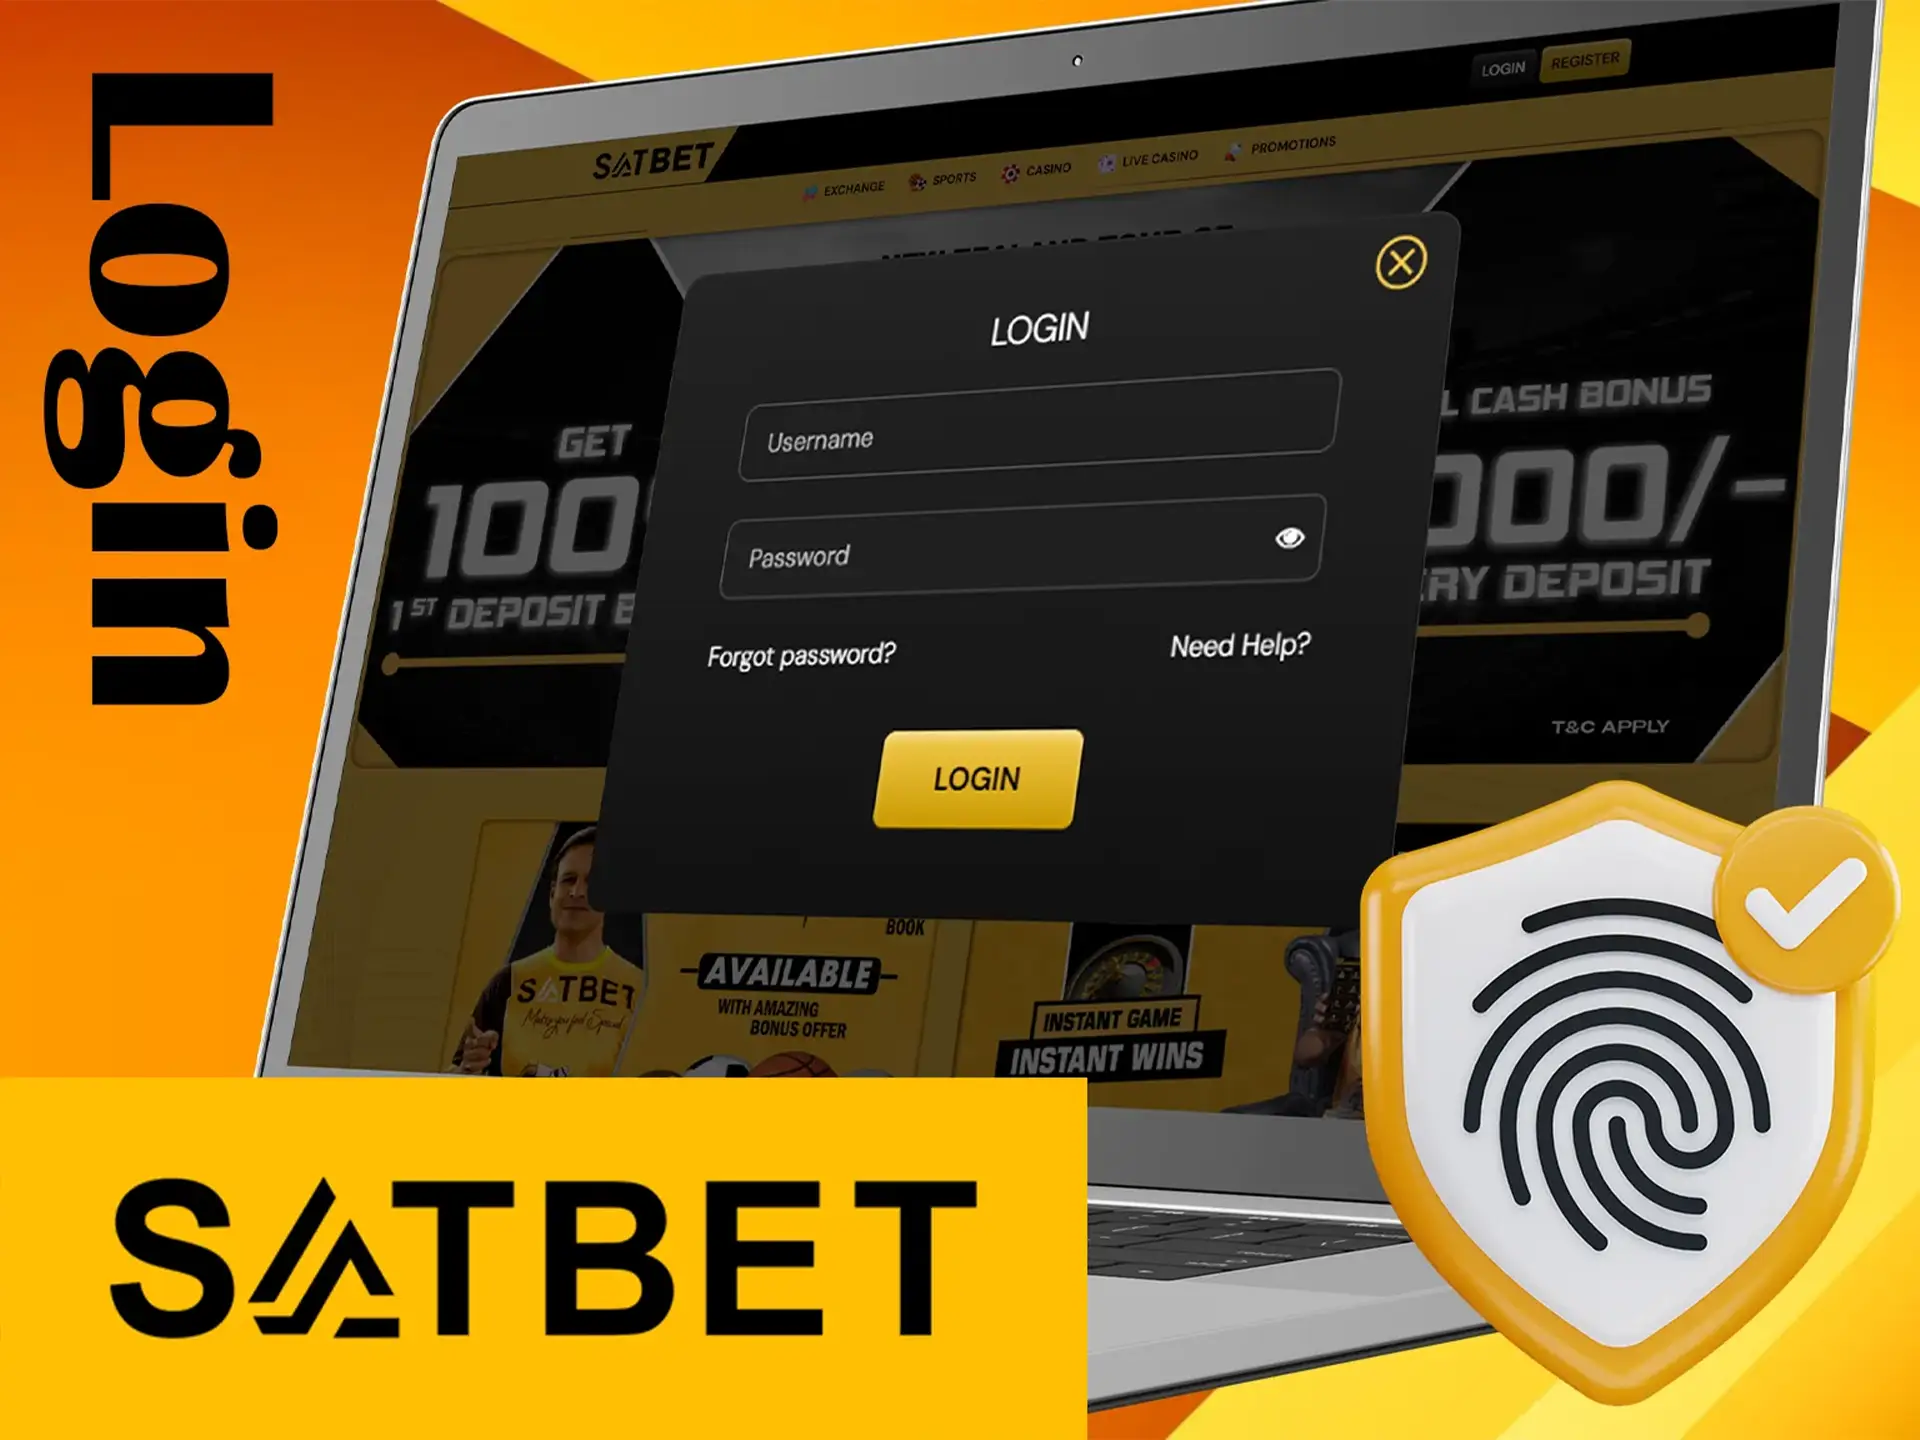 To start playing at Satbet Casino log in using your username and password.